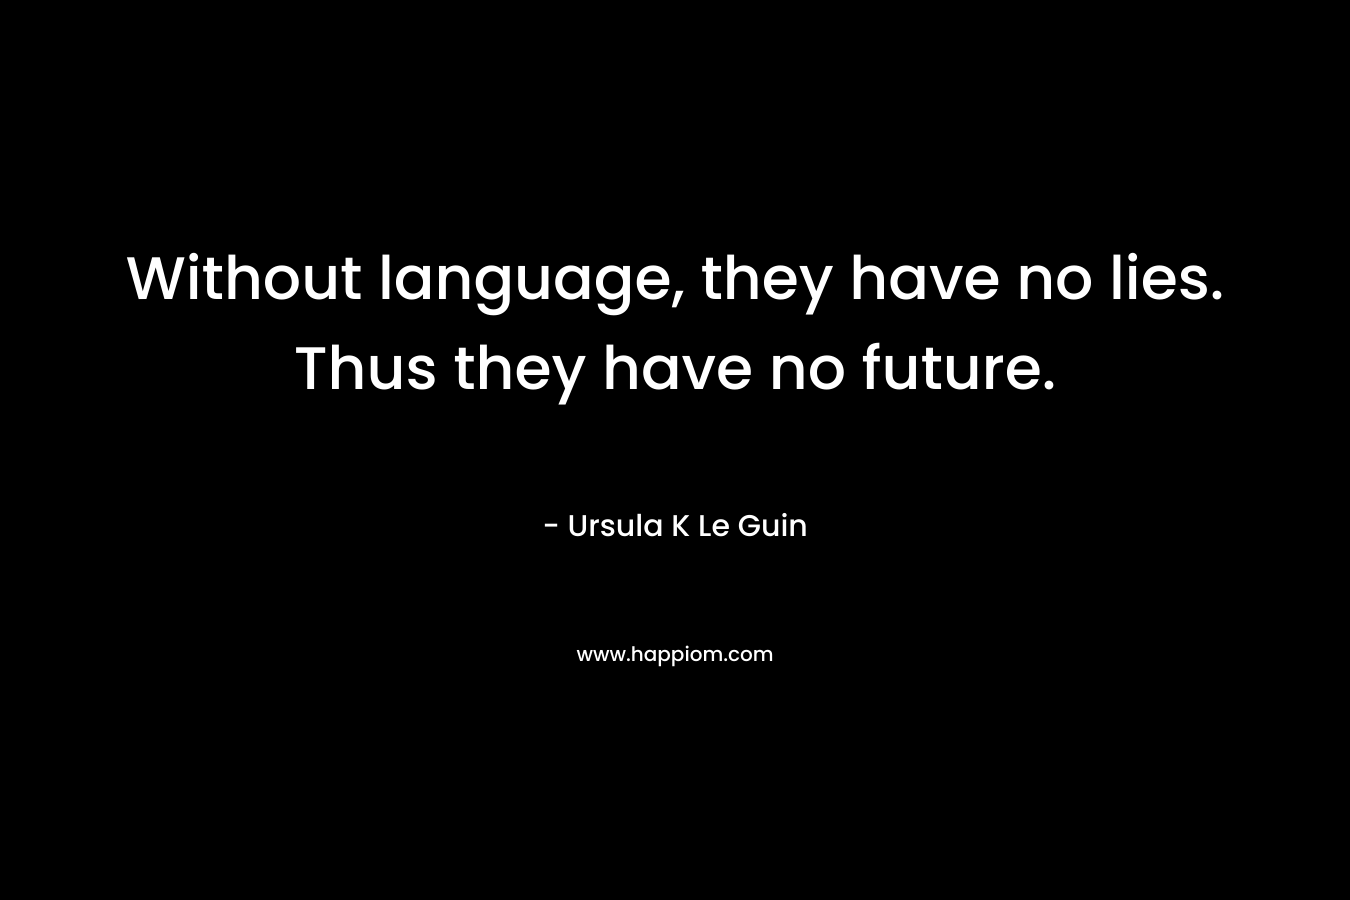 Without language, they have no lies. Thus they have no future.